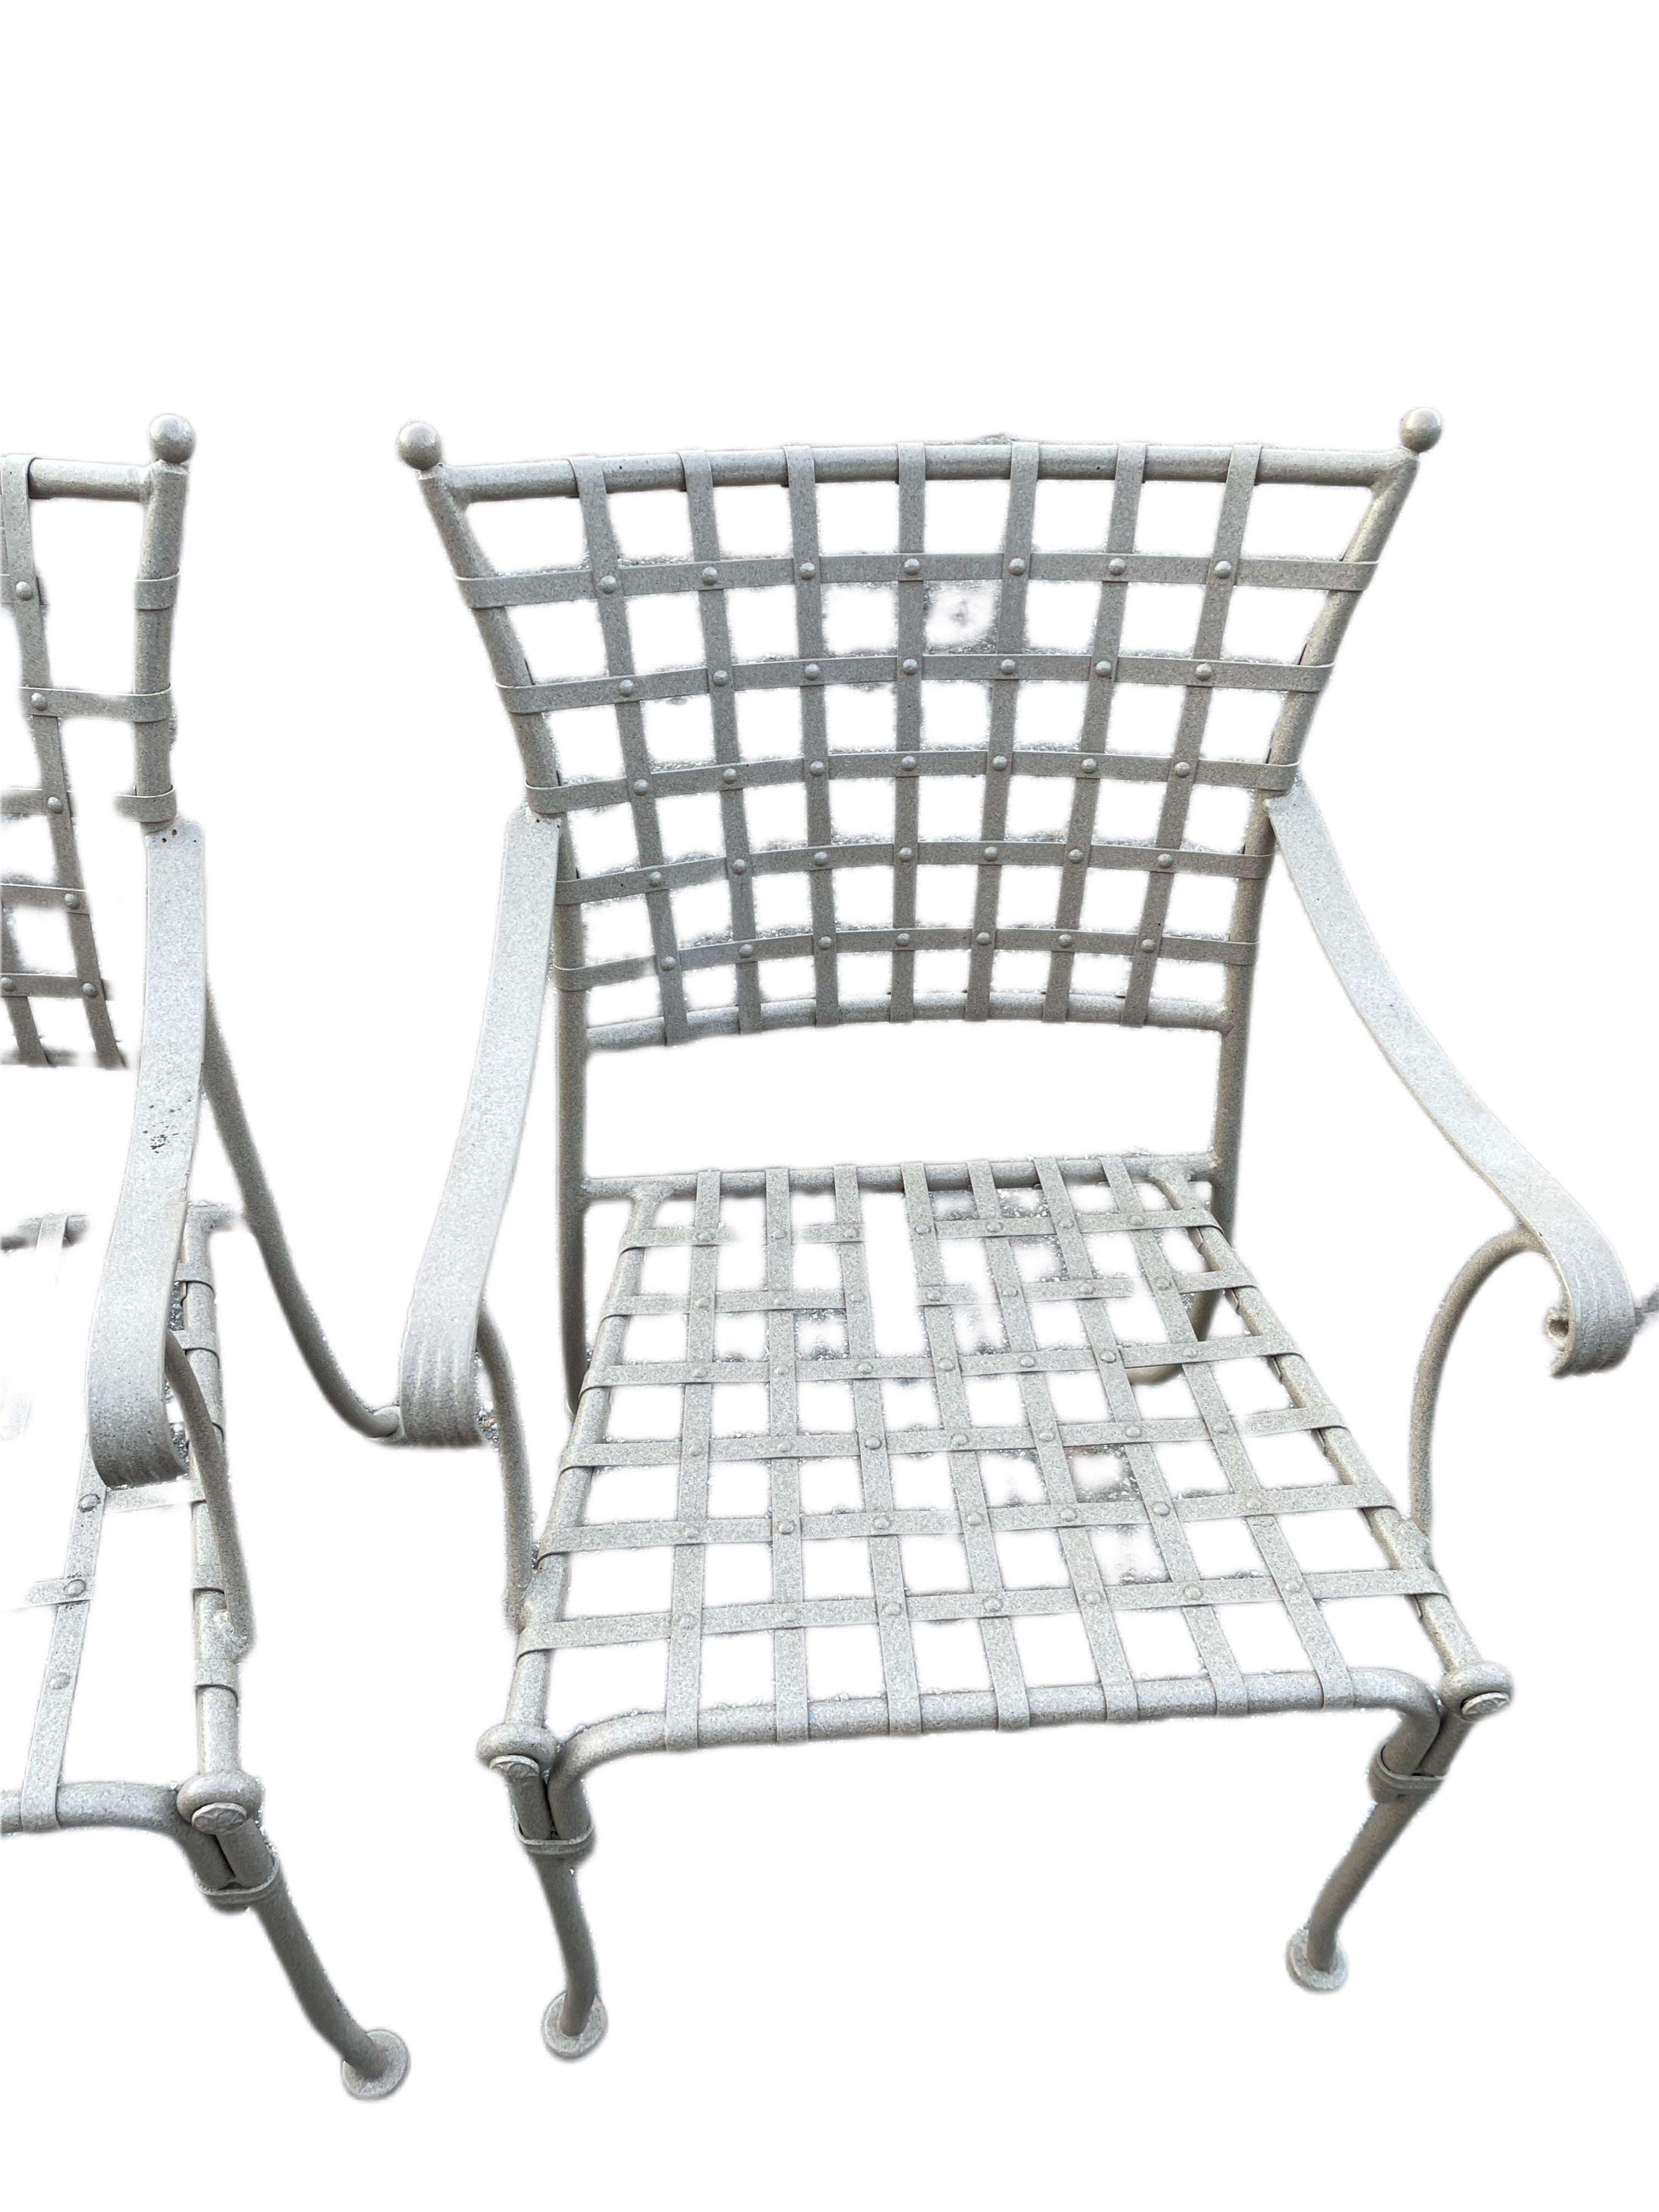 Mario Papperzini style for Salterini Hammered nail head dining armchairs

With a Beige Powder-Coated finish, these iron chairs are perfect to withstand all types of weather. Featured hammered studded nail heads along latic back, curved arms and leg,